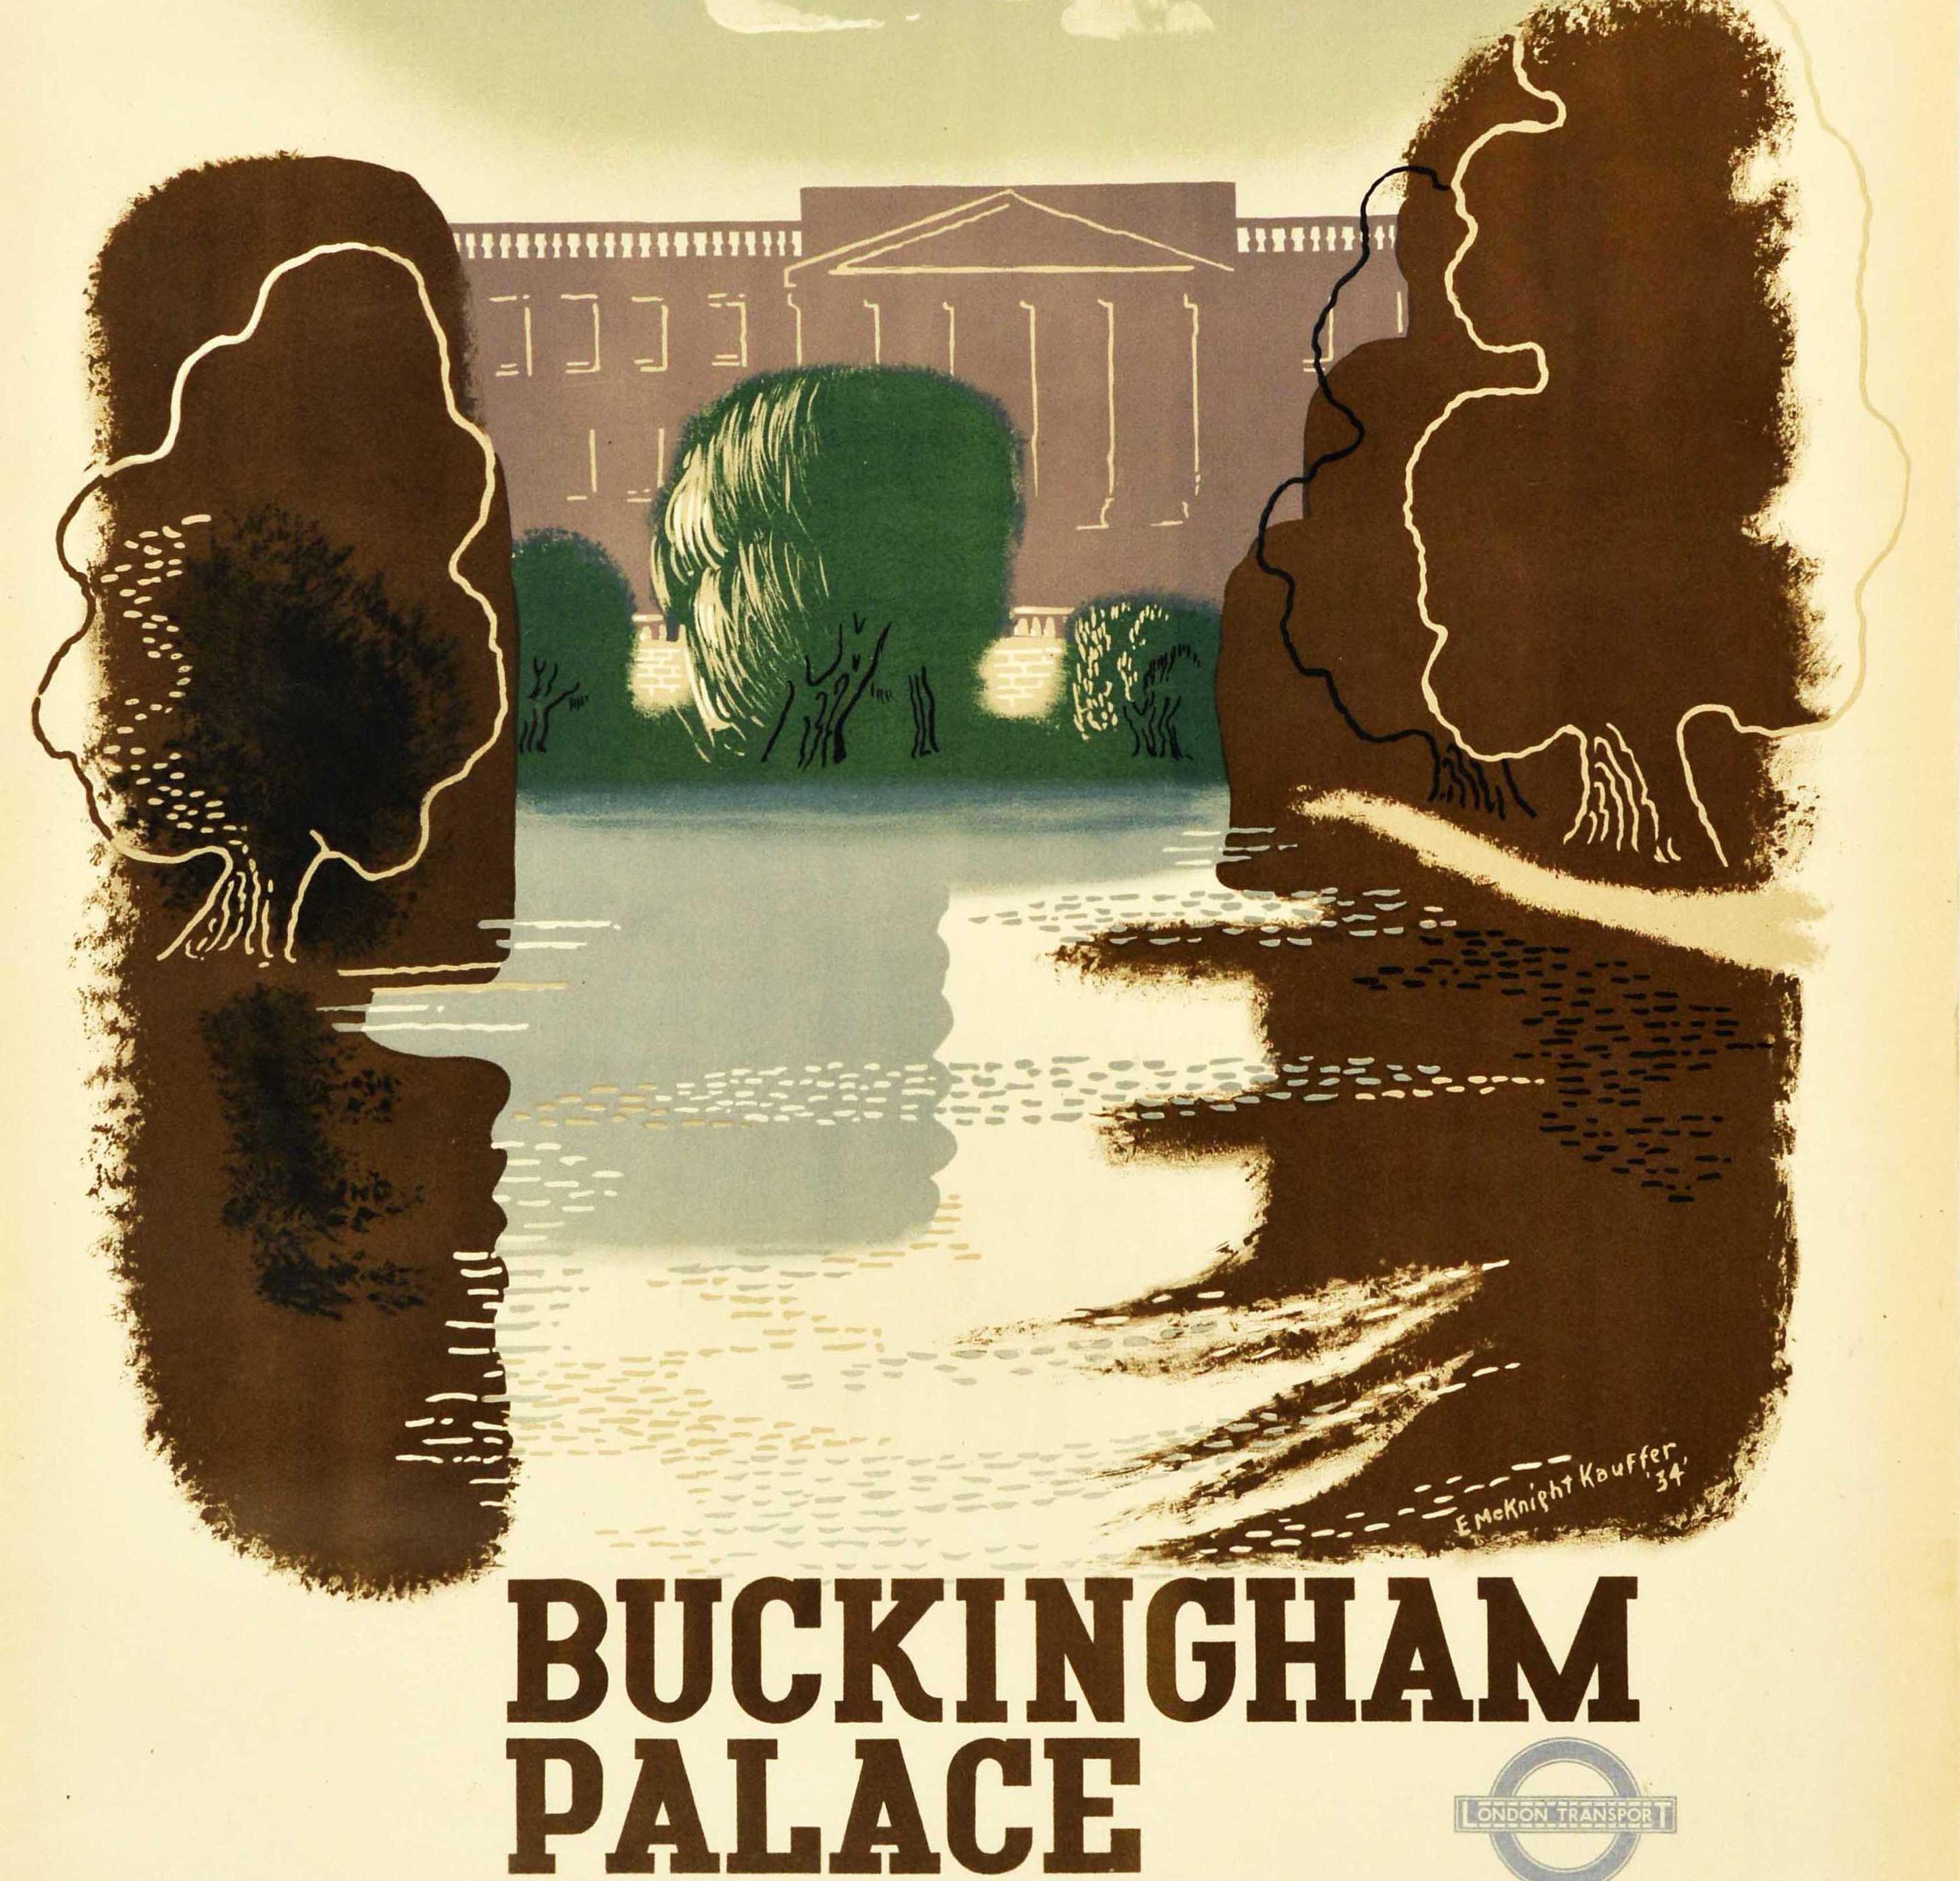 Original vintage London Transport poster designed by one of the most renowned poster artists of the 20th century Edward McKnight Kauffer (1890-1954) featuring a scenic view of Buckingham Palace from St. James's Park with the trees reflected on the